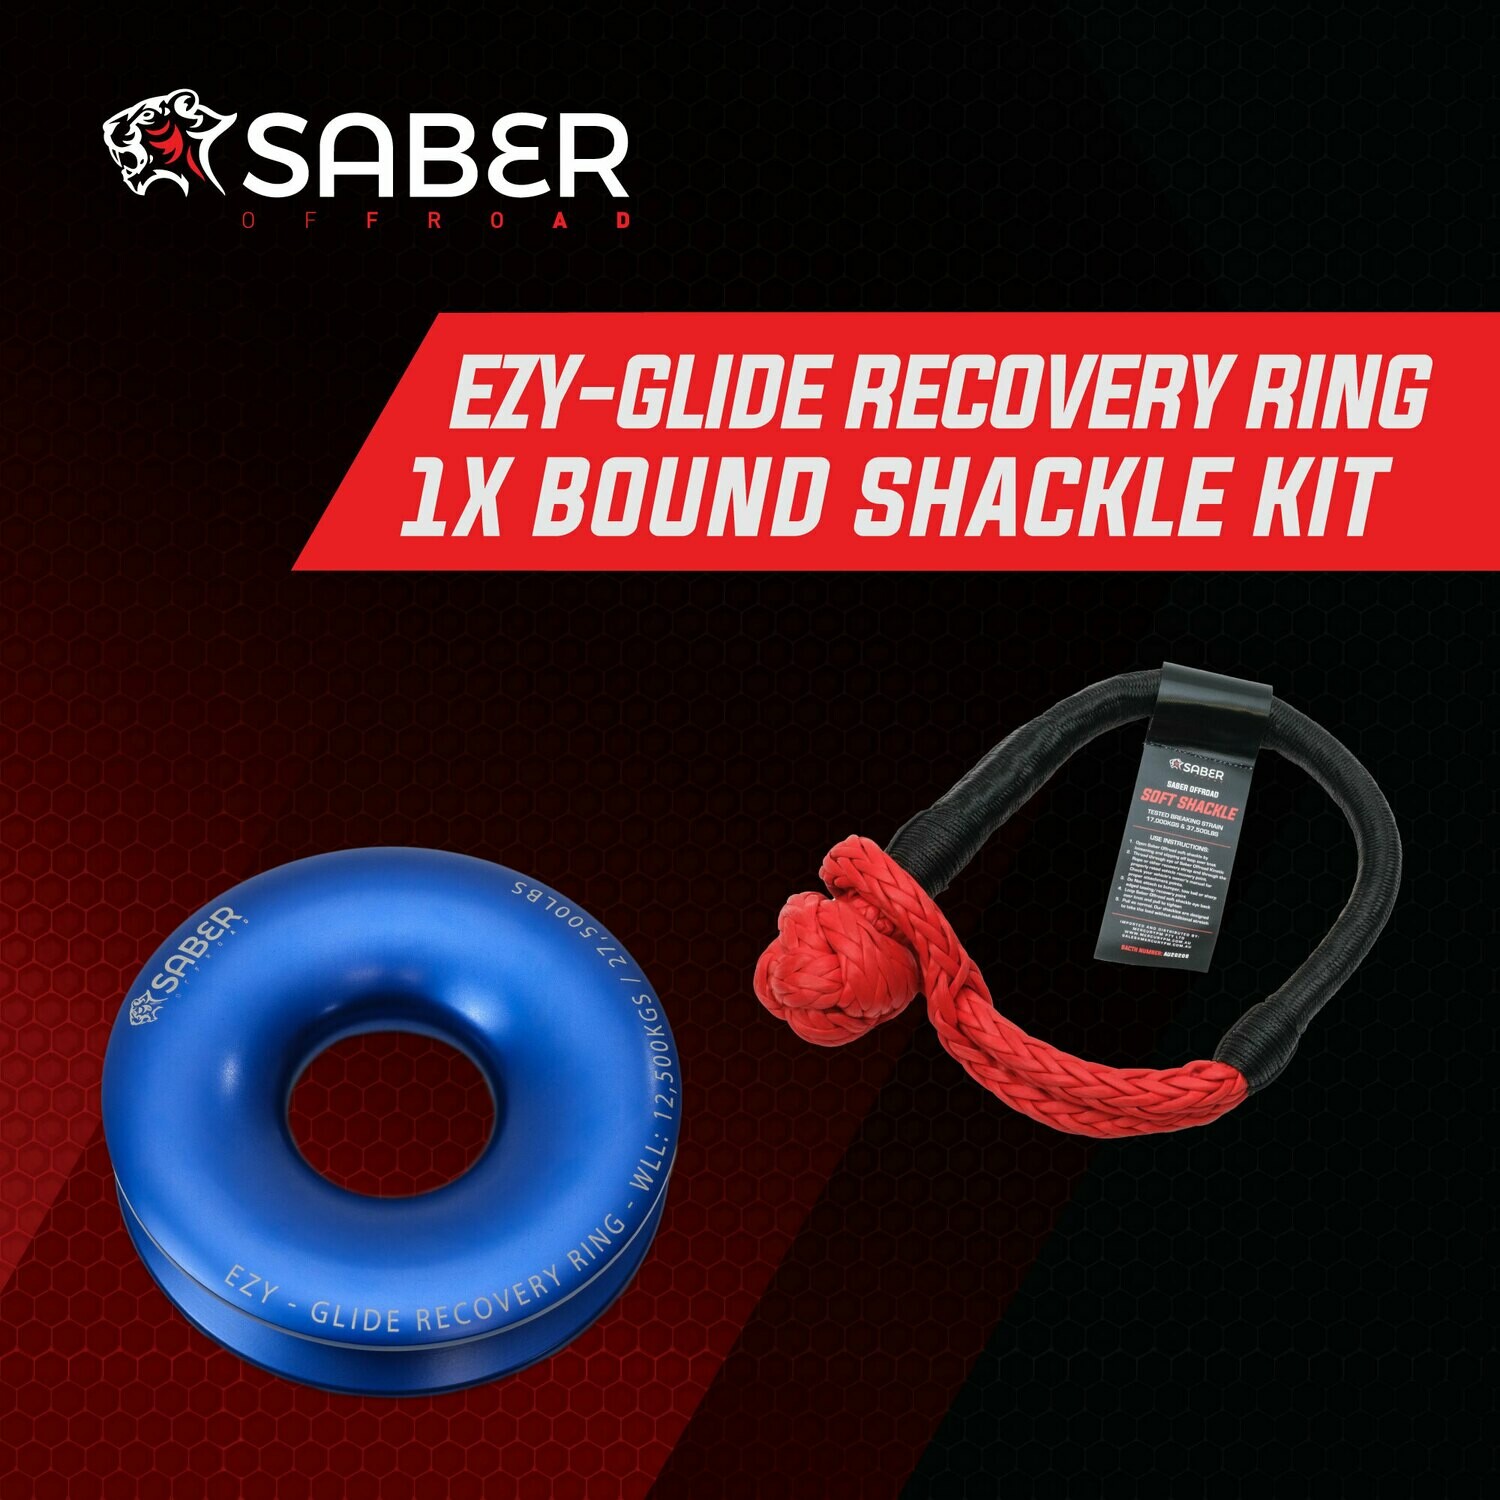 SABER EZY-GLIDE RECOVERY RING NEW +17K BOUND SOFT SHACKLE KIT